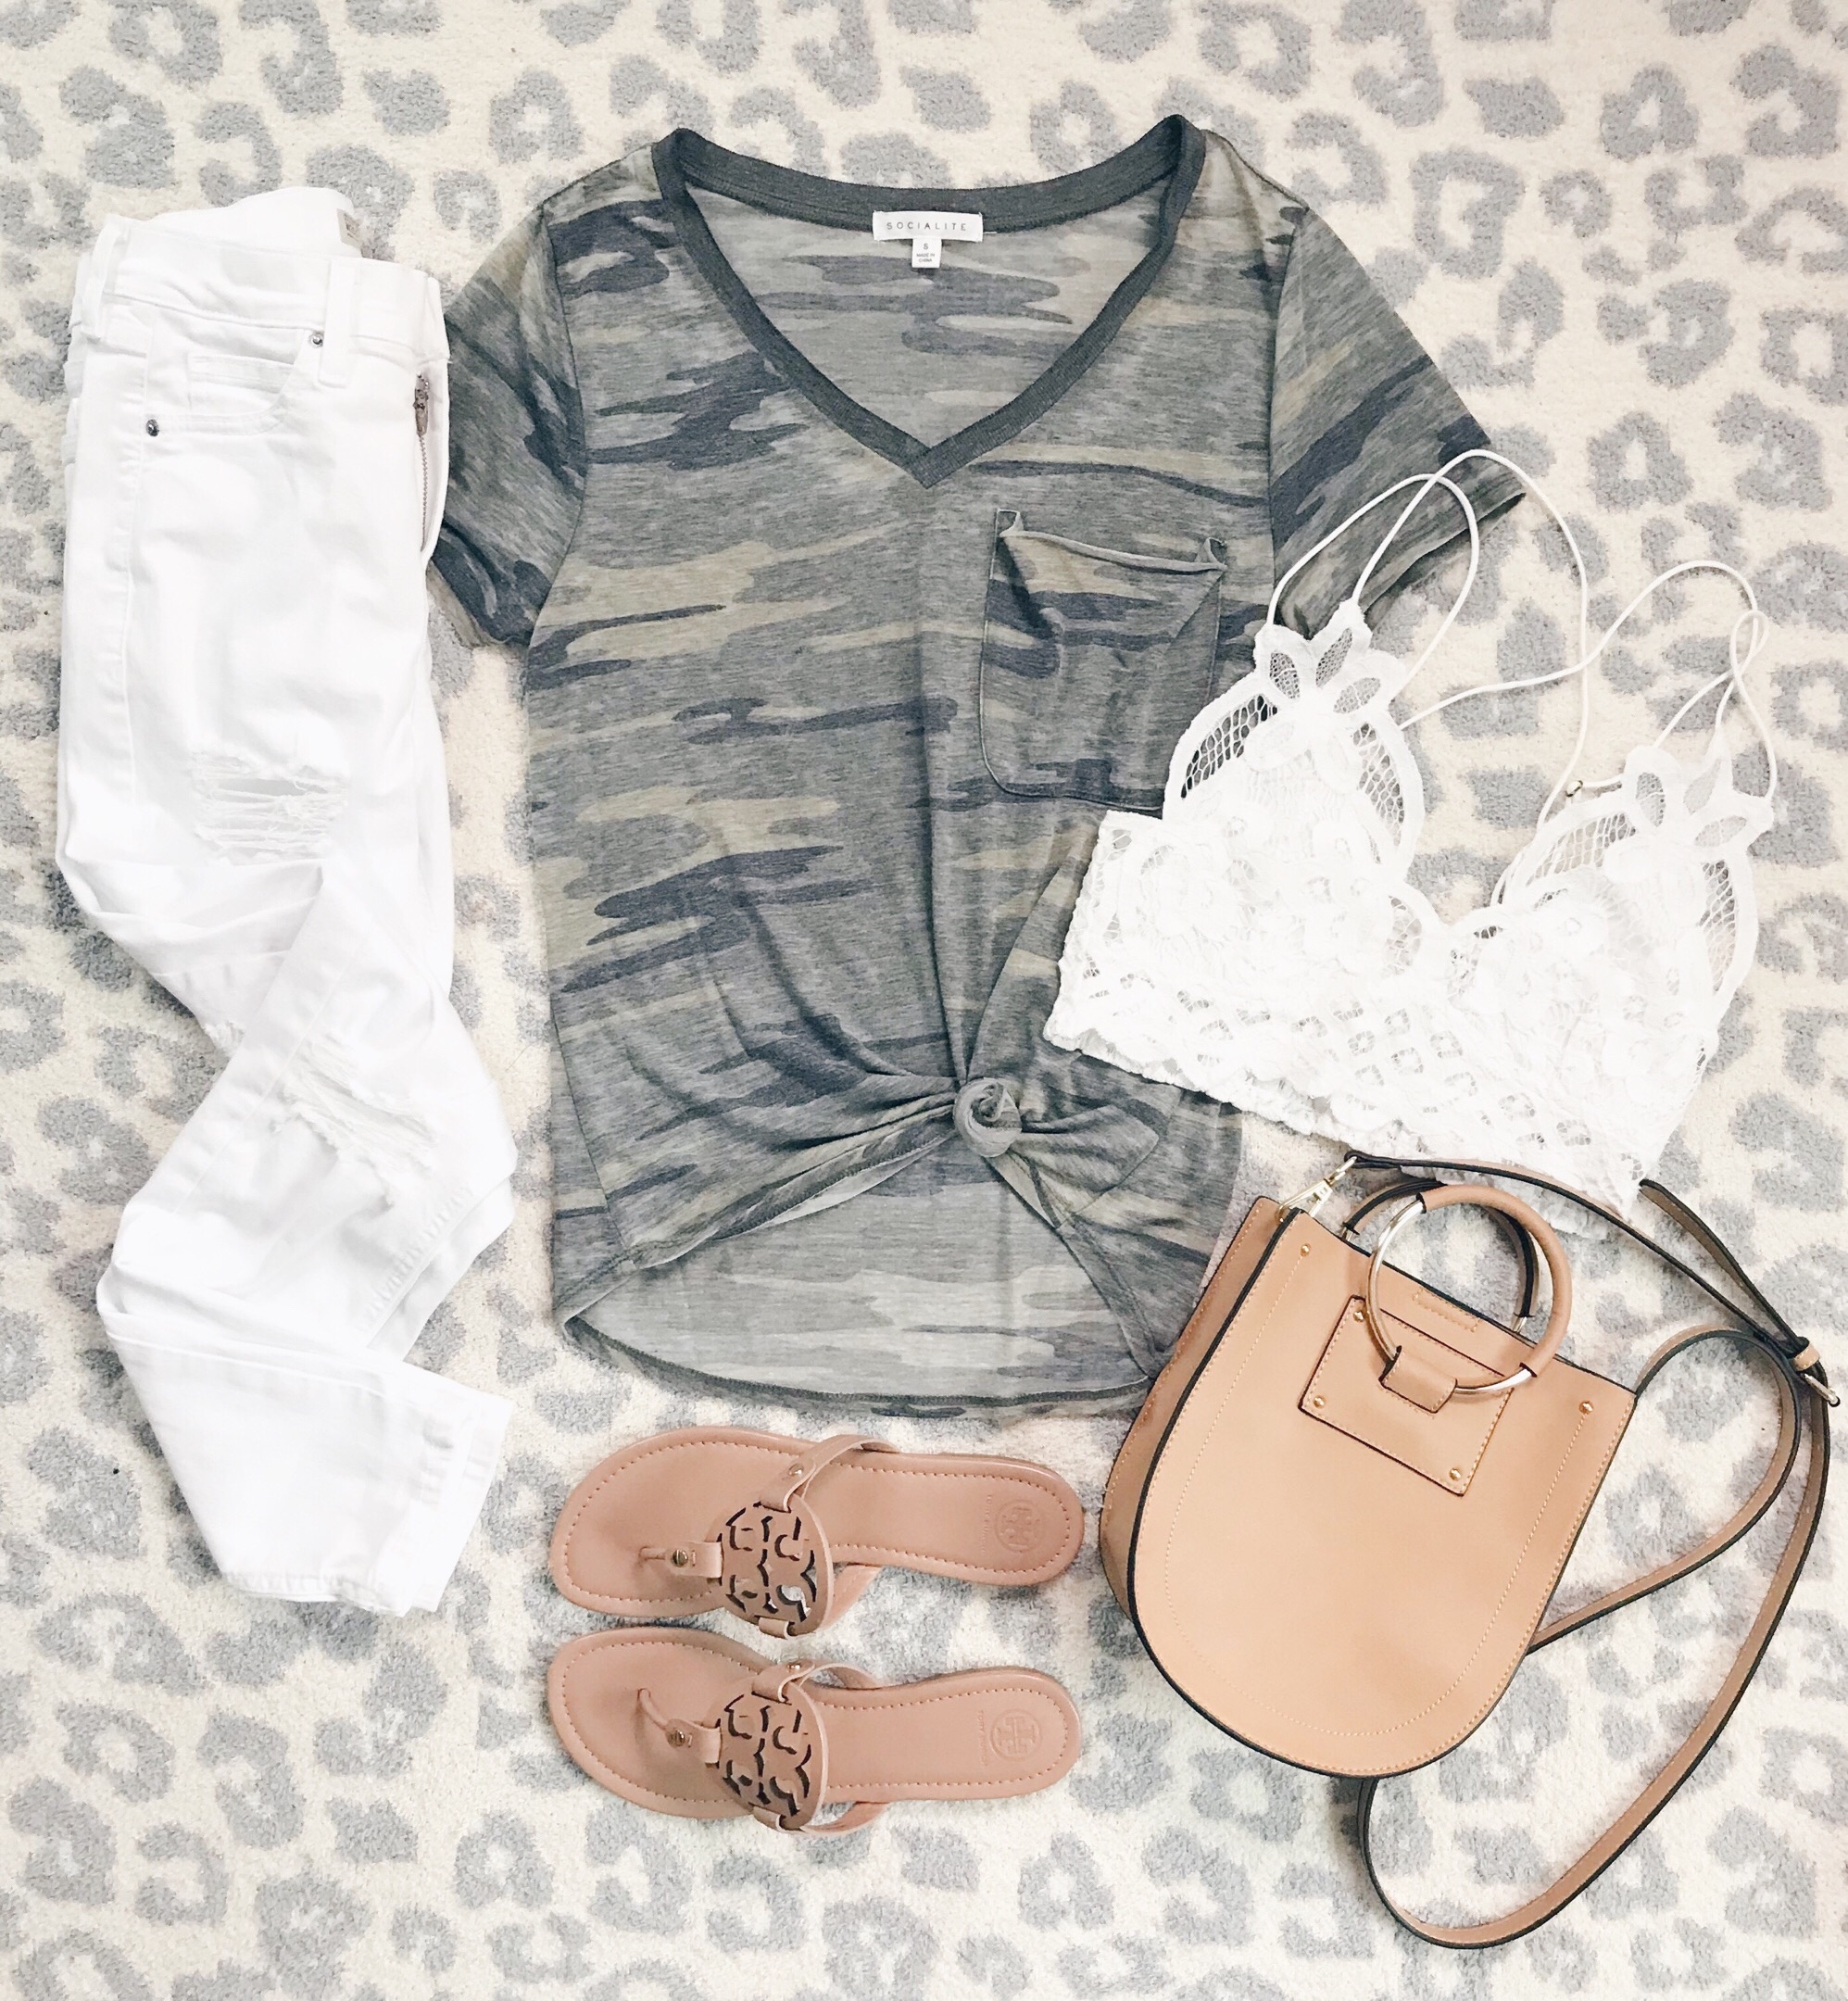 Summer Vacation Outfit Ideas - Camo Tshirt